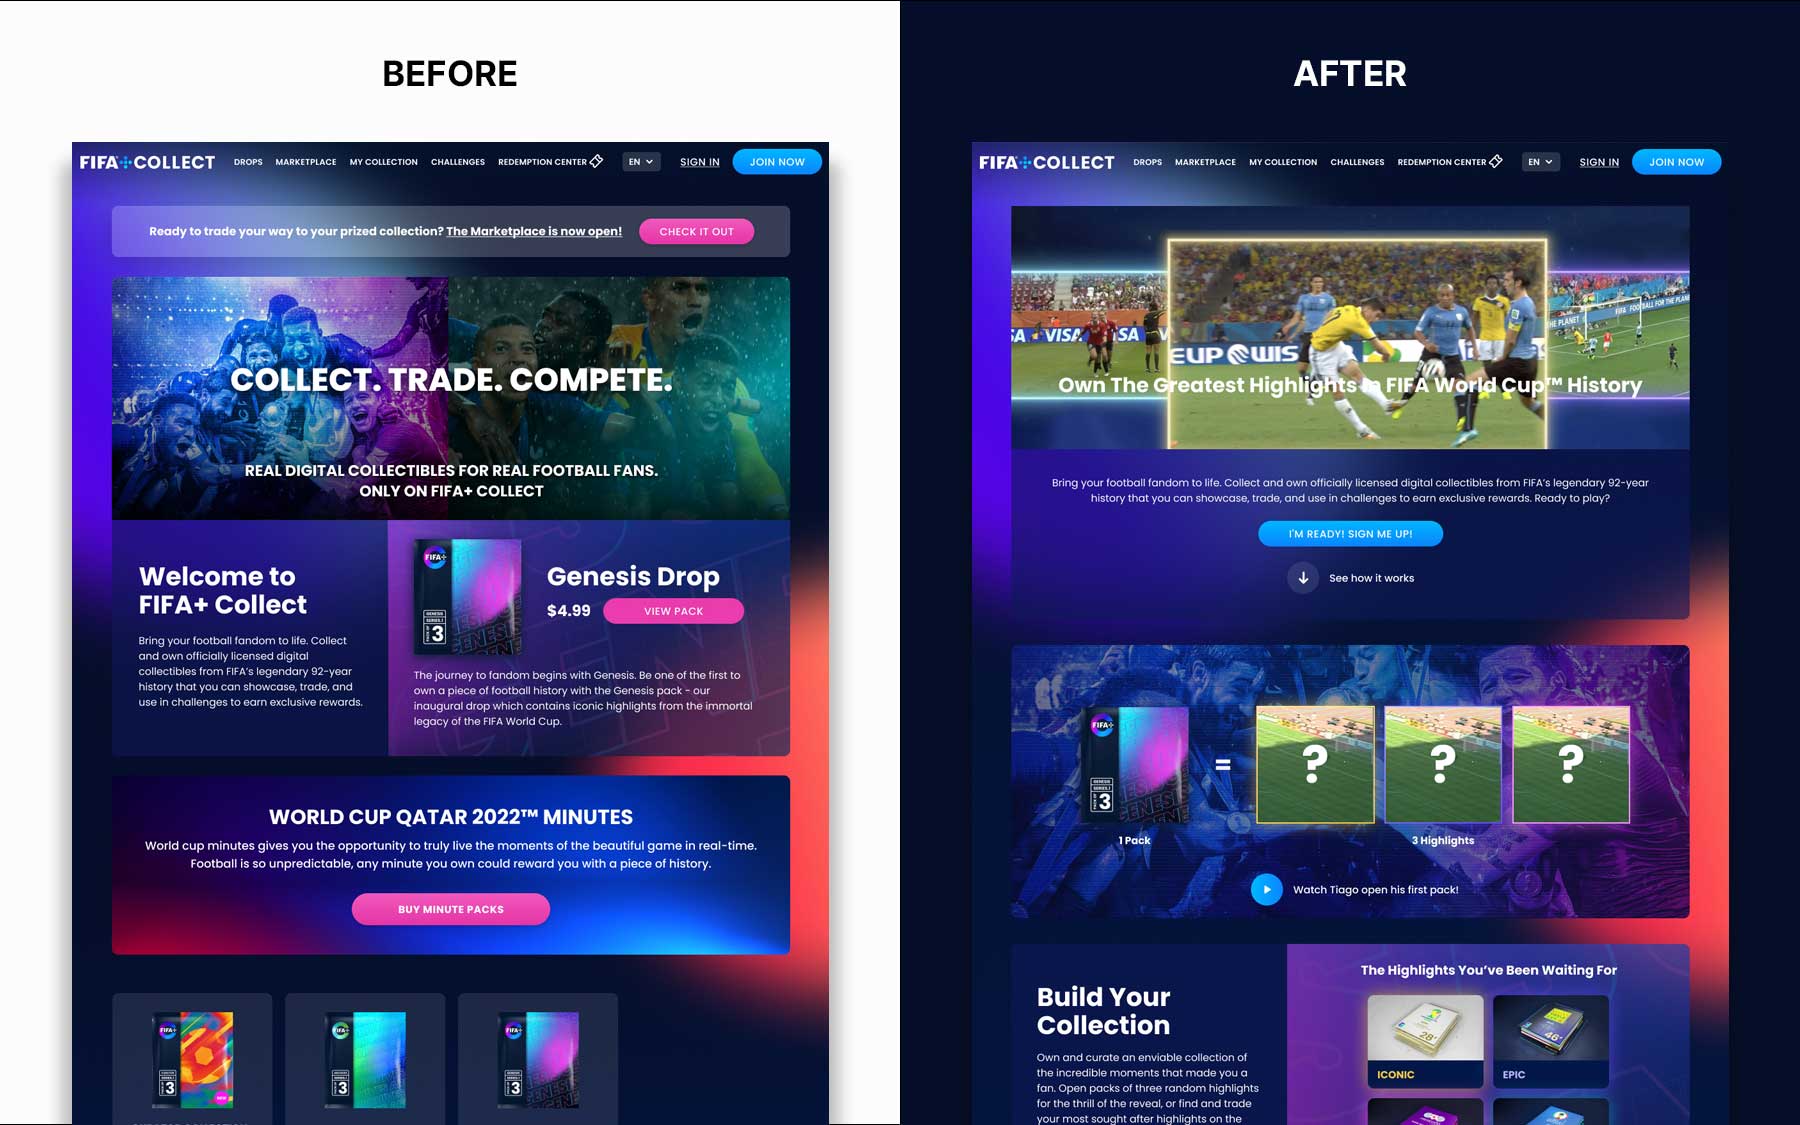 Before and after comparison of the FIFA+ Collect homepage.